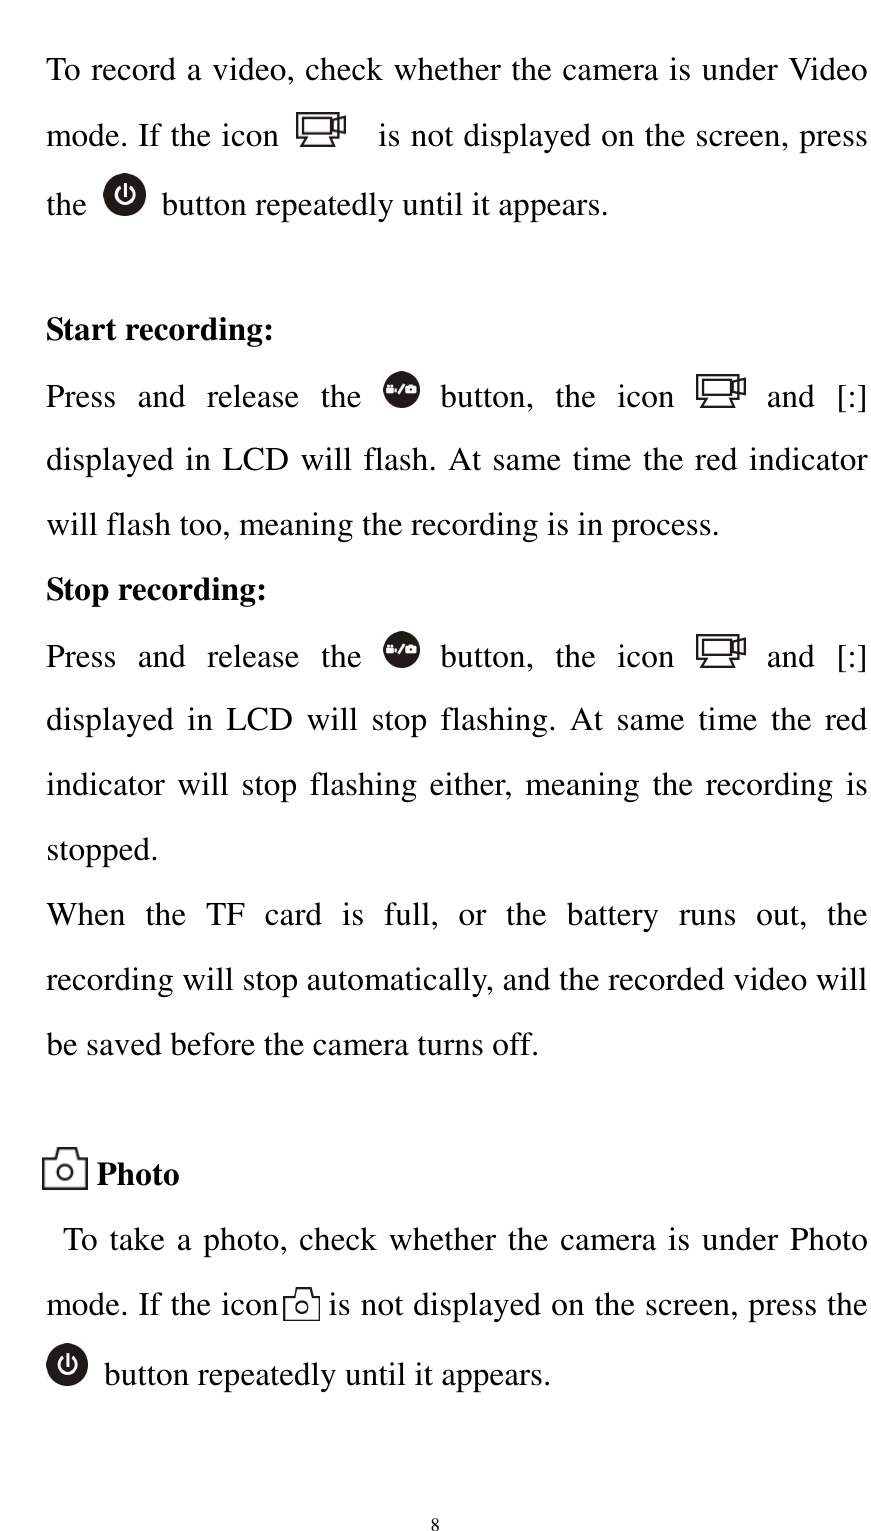    8To record a video, check whether the camera is under Video mode. If the icon      is not displayed on the screen, press the    button repeatedly until it appears.  Start recording: Press  and  release  the    button,  the  icon    and  [:] displayed in LCD will flash. At same time the red indicator will flash too, meaning the recording is in process. Stop recording: Press  and  release  the    button,  the  icon    and  [:] displayed  in  LCD will  stop flashing.  At same  time  the red indicator will stop flashing either, meaning the recording is stopped.   When  the  TF  card  is  full,  or  the  battery  runs  out,  the recording will stop automatically, and the recorded video will be saved before the camera turns off.          Photo   To take a photo, check whether the camera is under Photo mode. If the icon      is not displayed on the screen, press the   button repeatedly until it appears.  